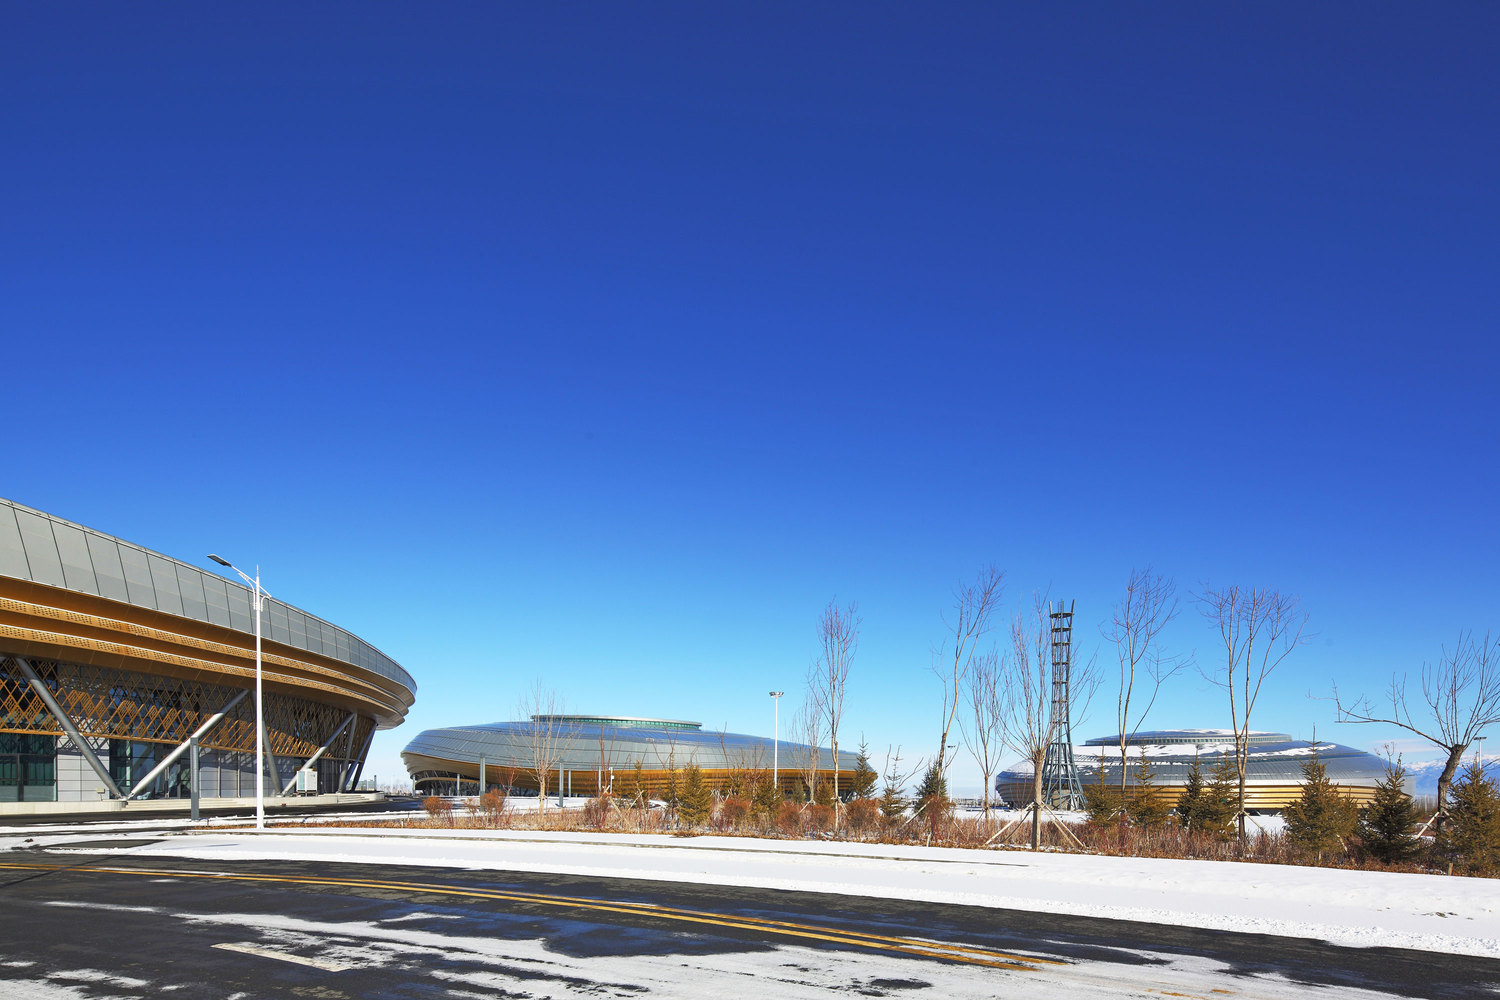 ice-sports-center-of-the-national-winter-games-02-main-architecture.jpg